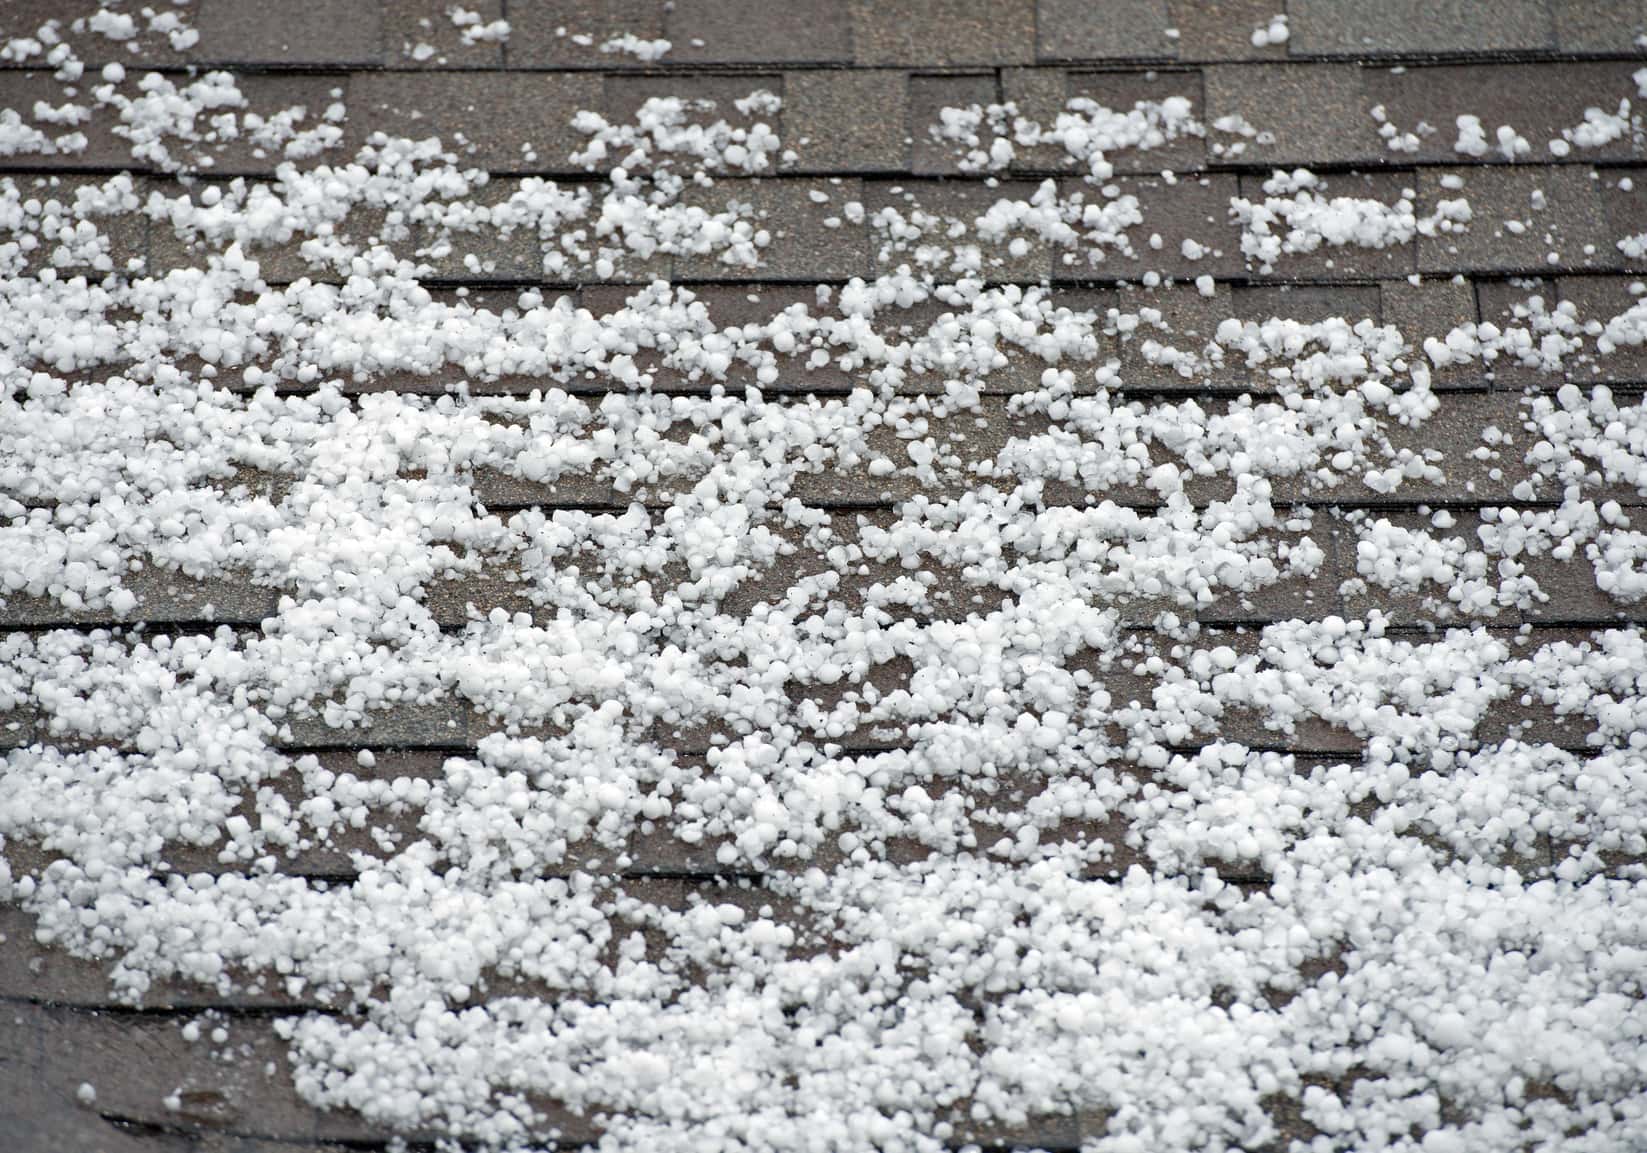 Hail on the Roof. After Heavy Storm with Hail. Roof Closeup.